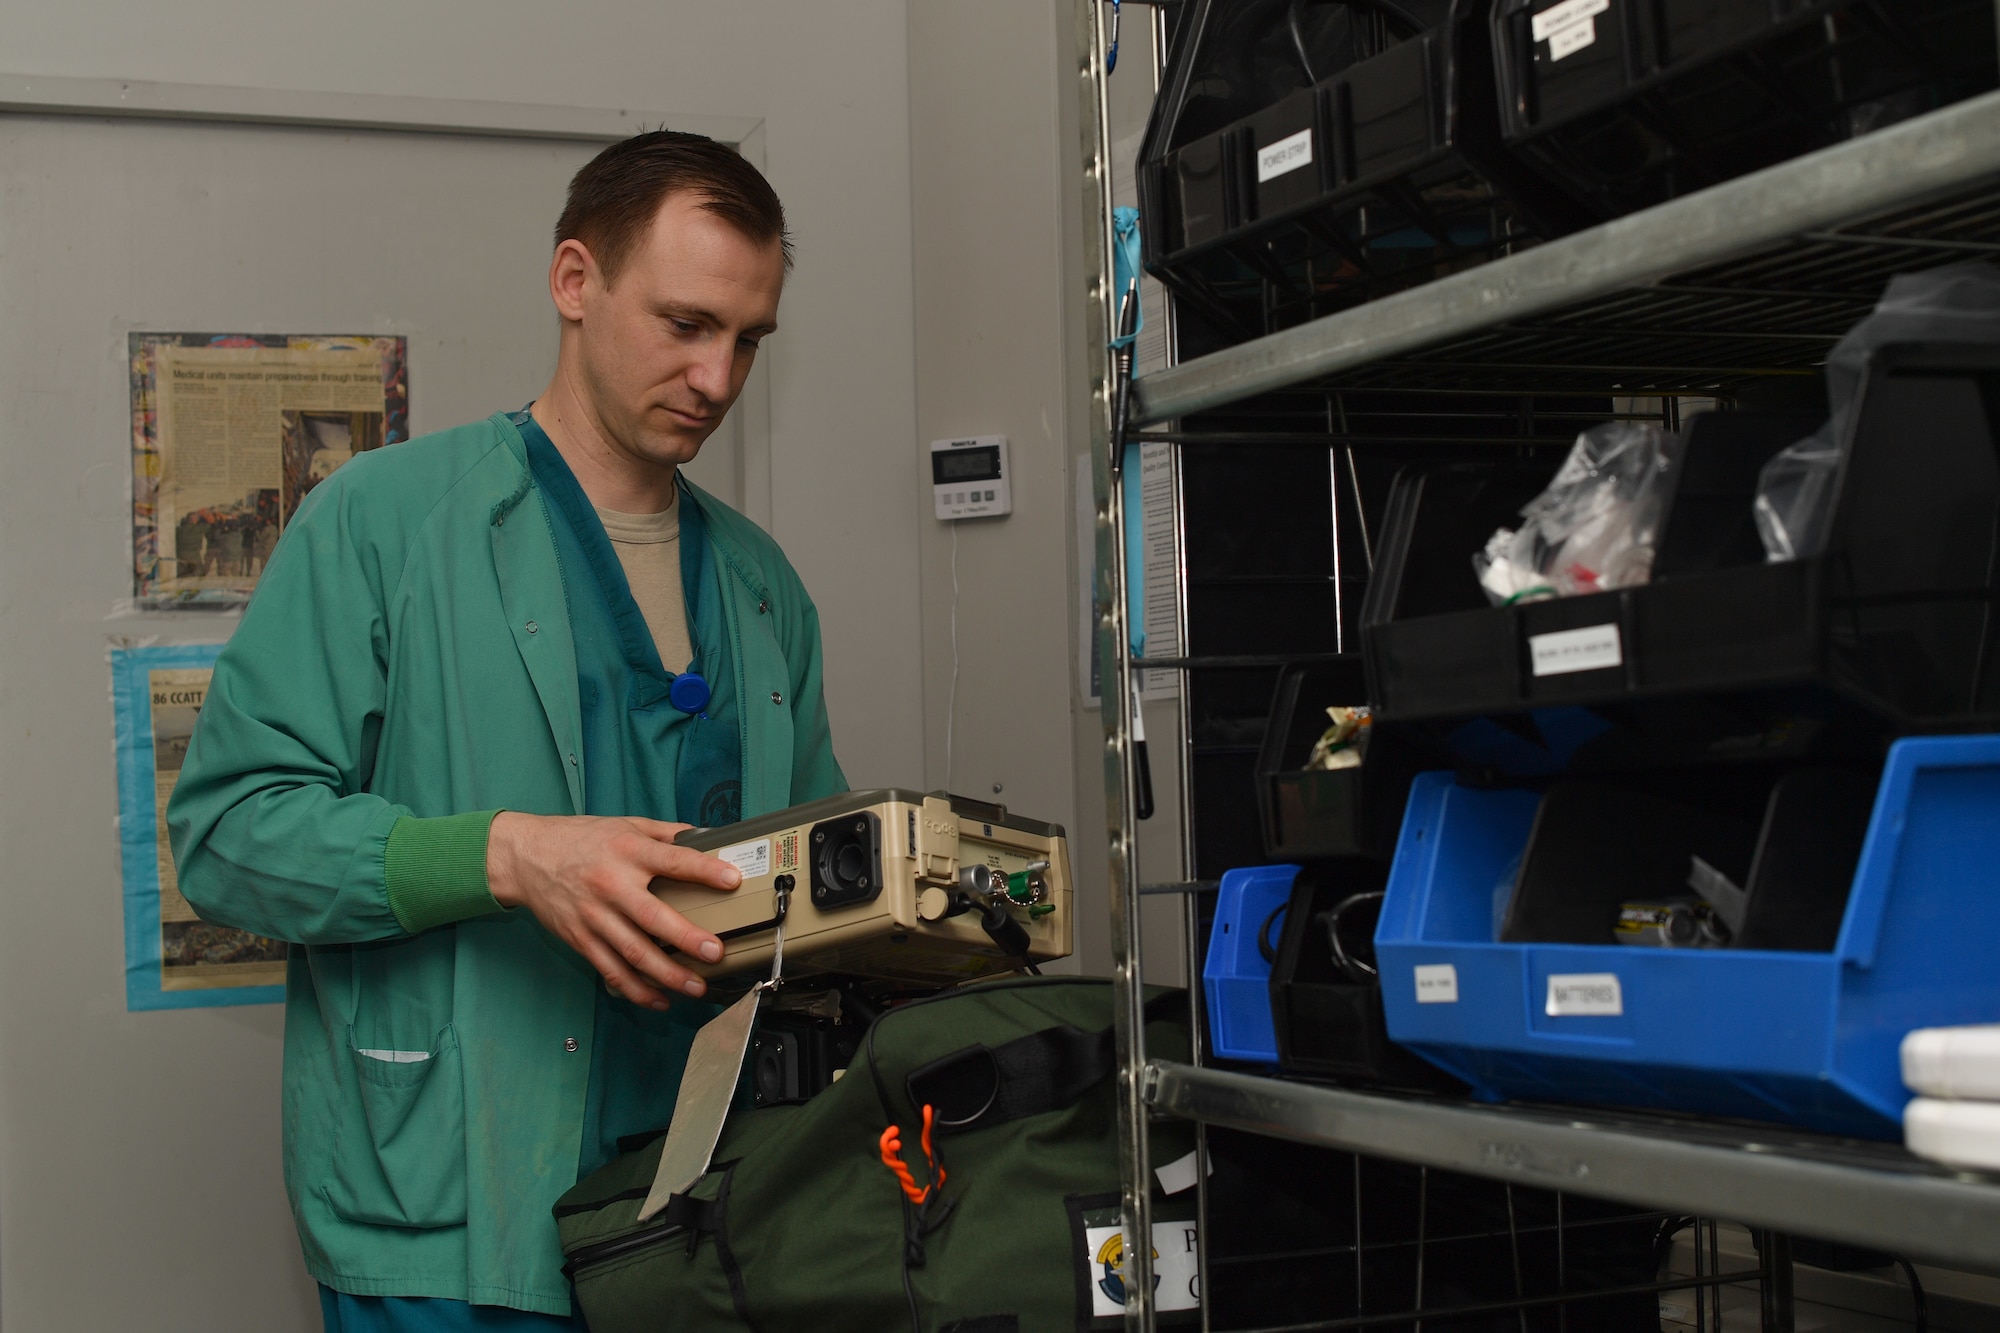 A medical worker holding medical equipment.